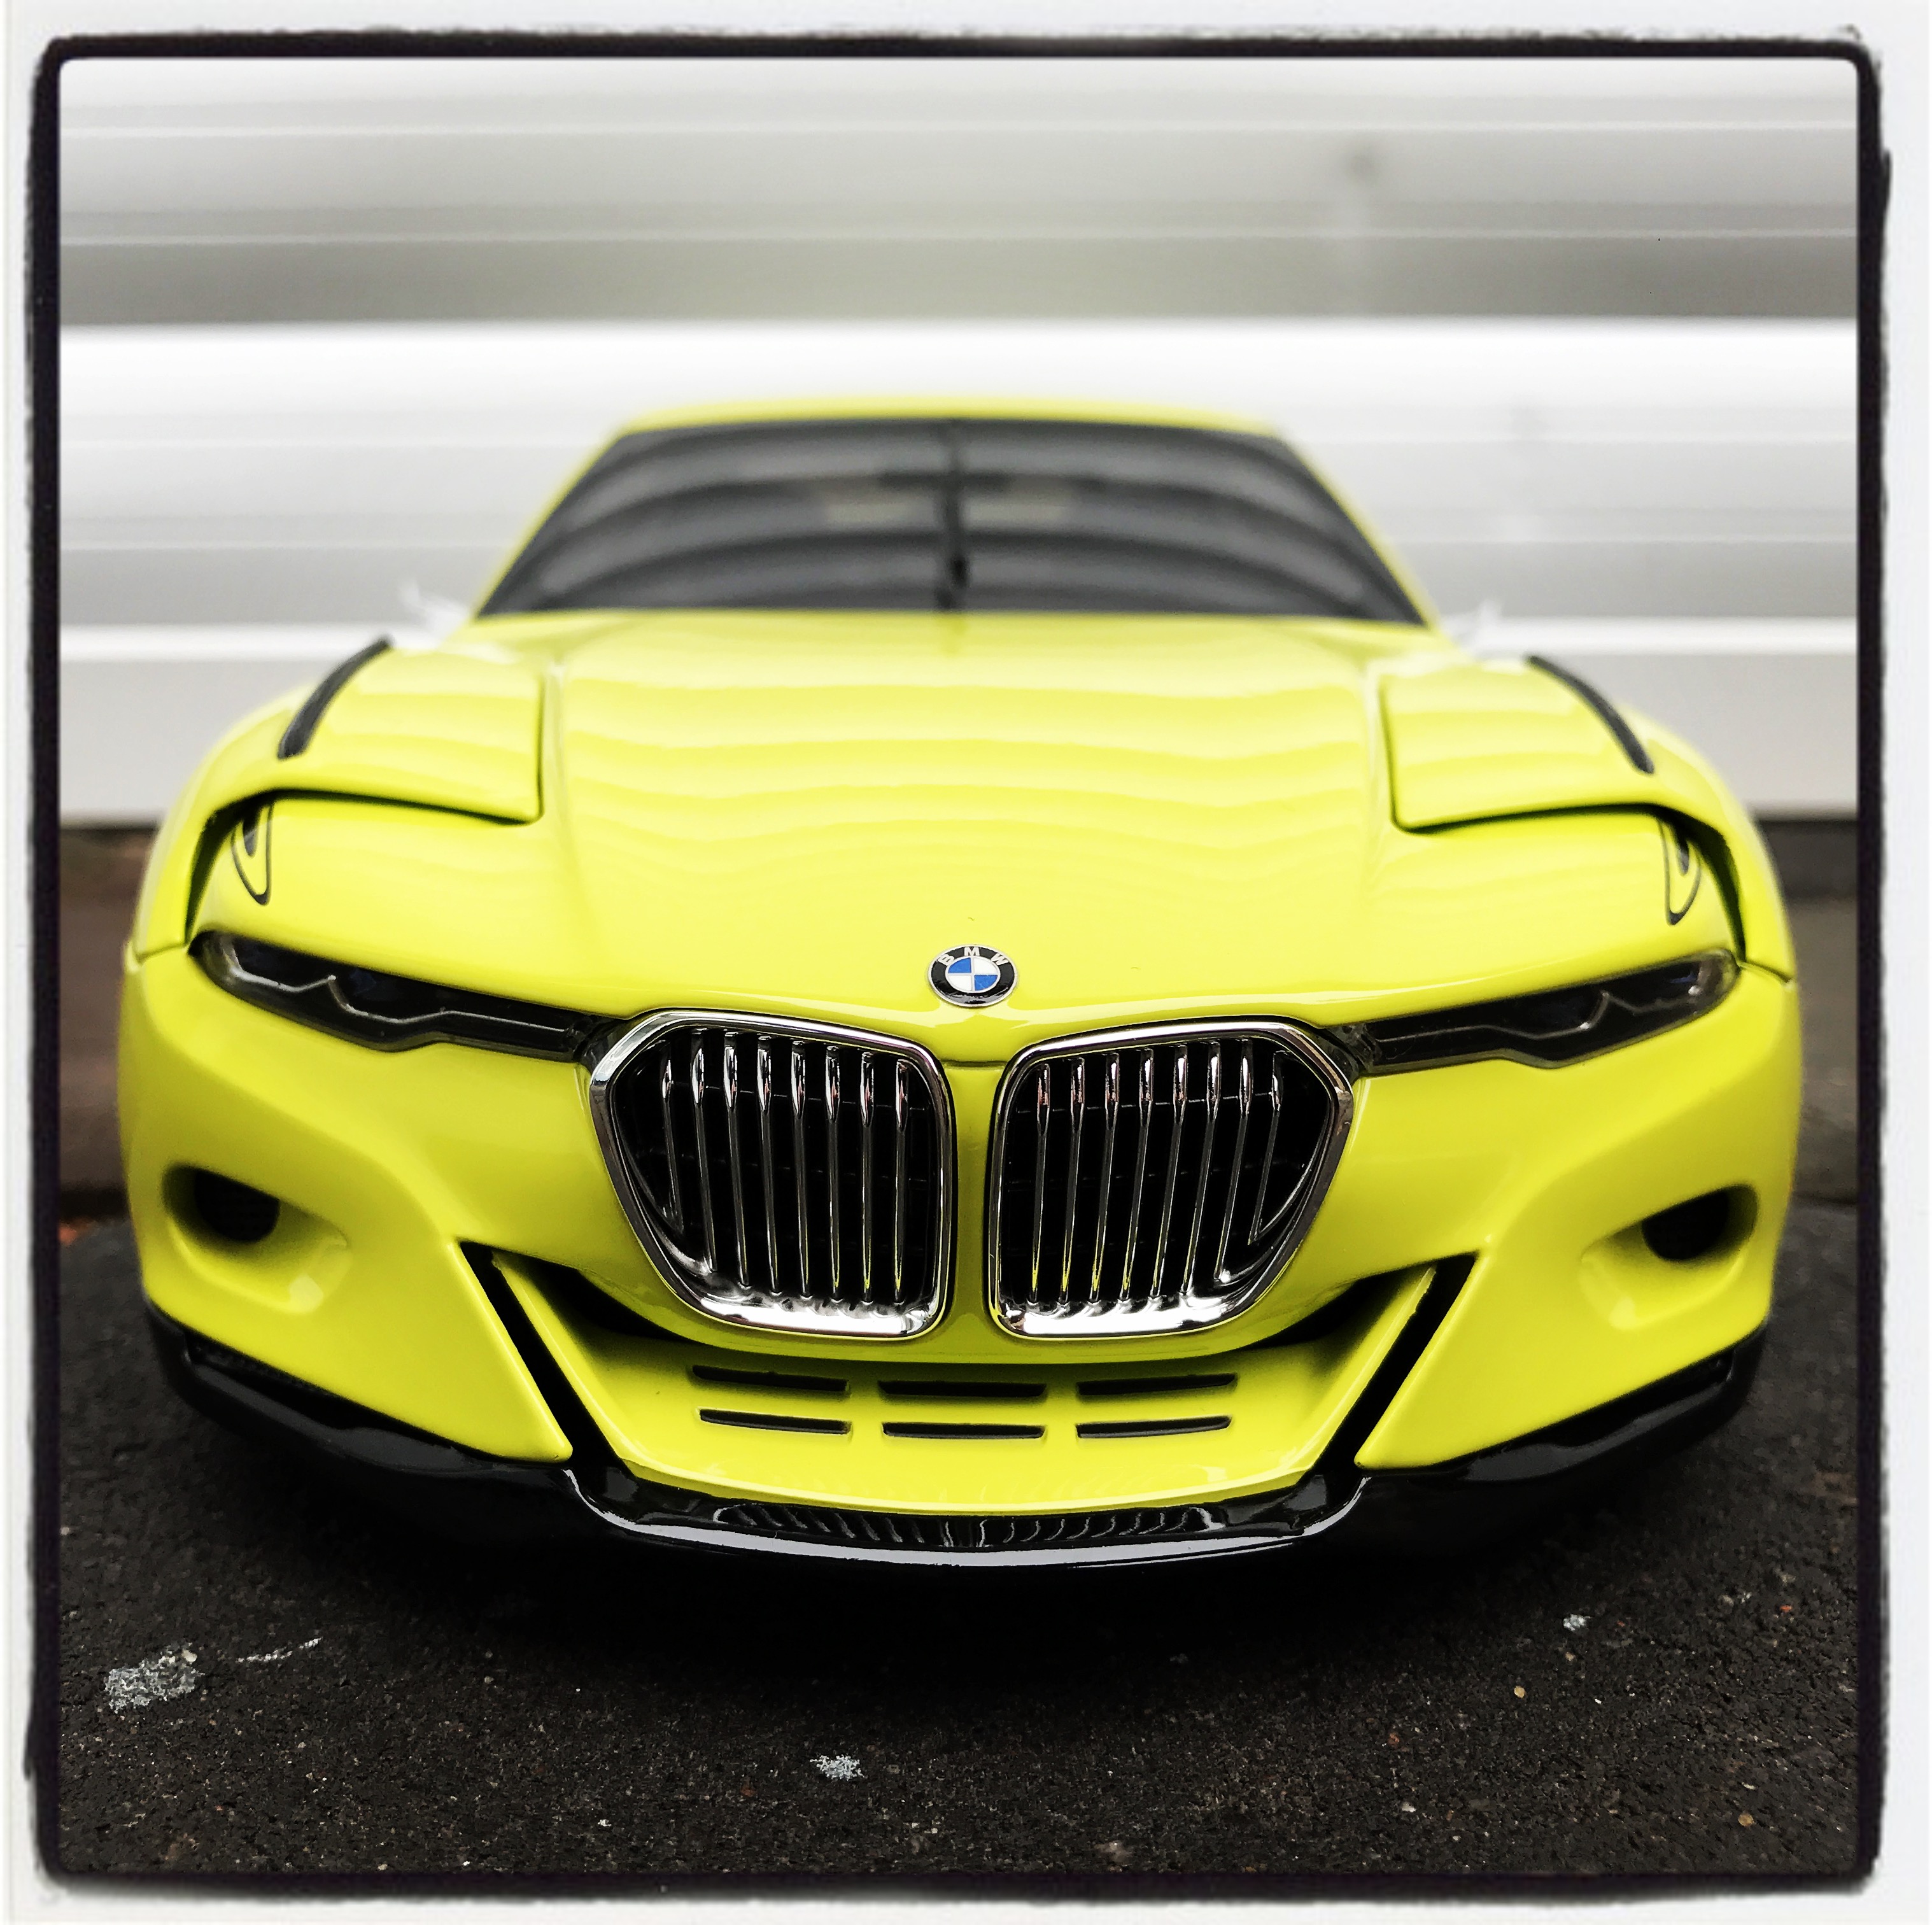 BMW 3.0 CSL Hommage, Hommage collection (norev)